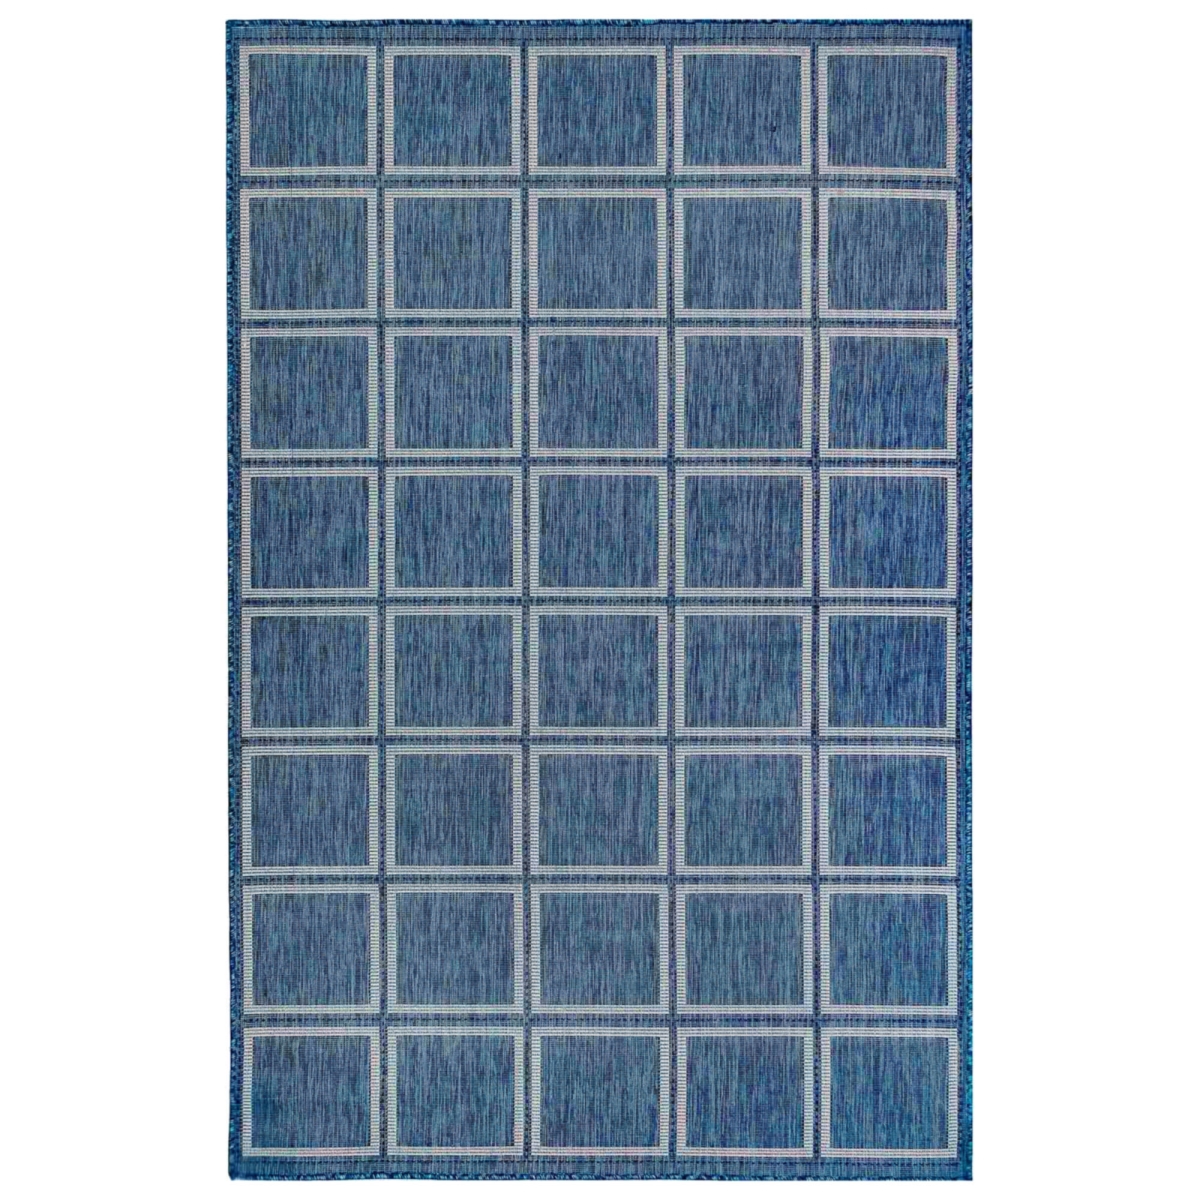 Trans-ocean Imports Cre45842633 39 In. X 59 In. Liora Manne Carmel Squares Indoor & Outdoor Wilton Woven Rug - Navy